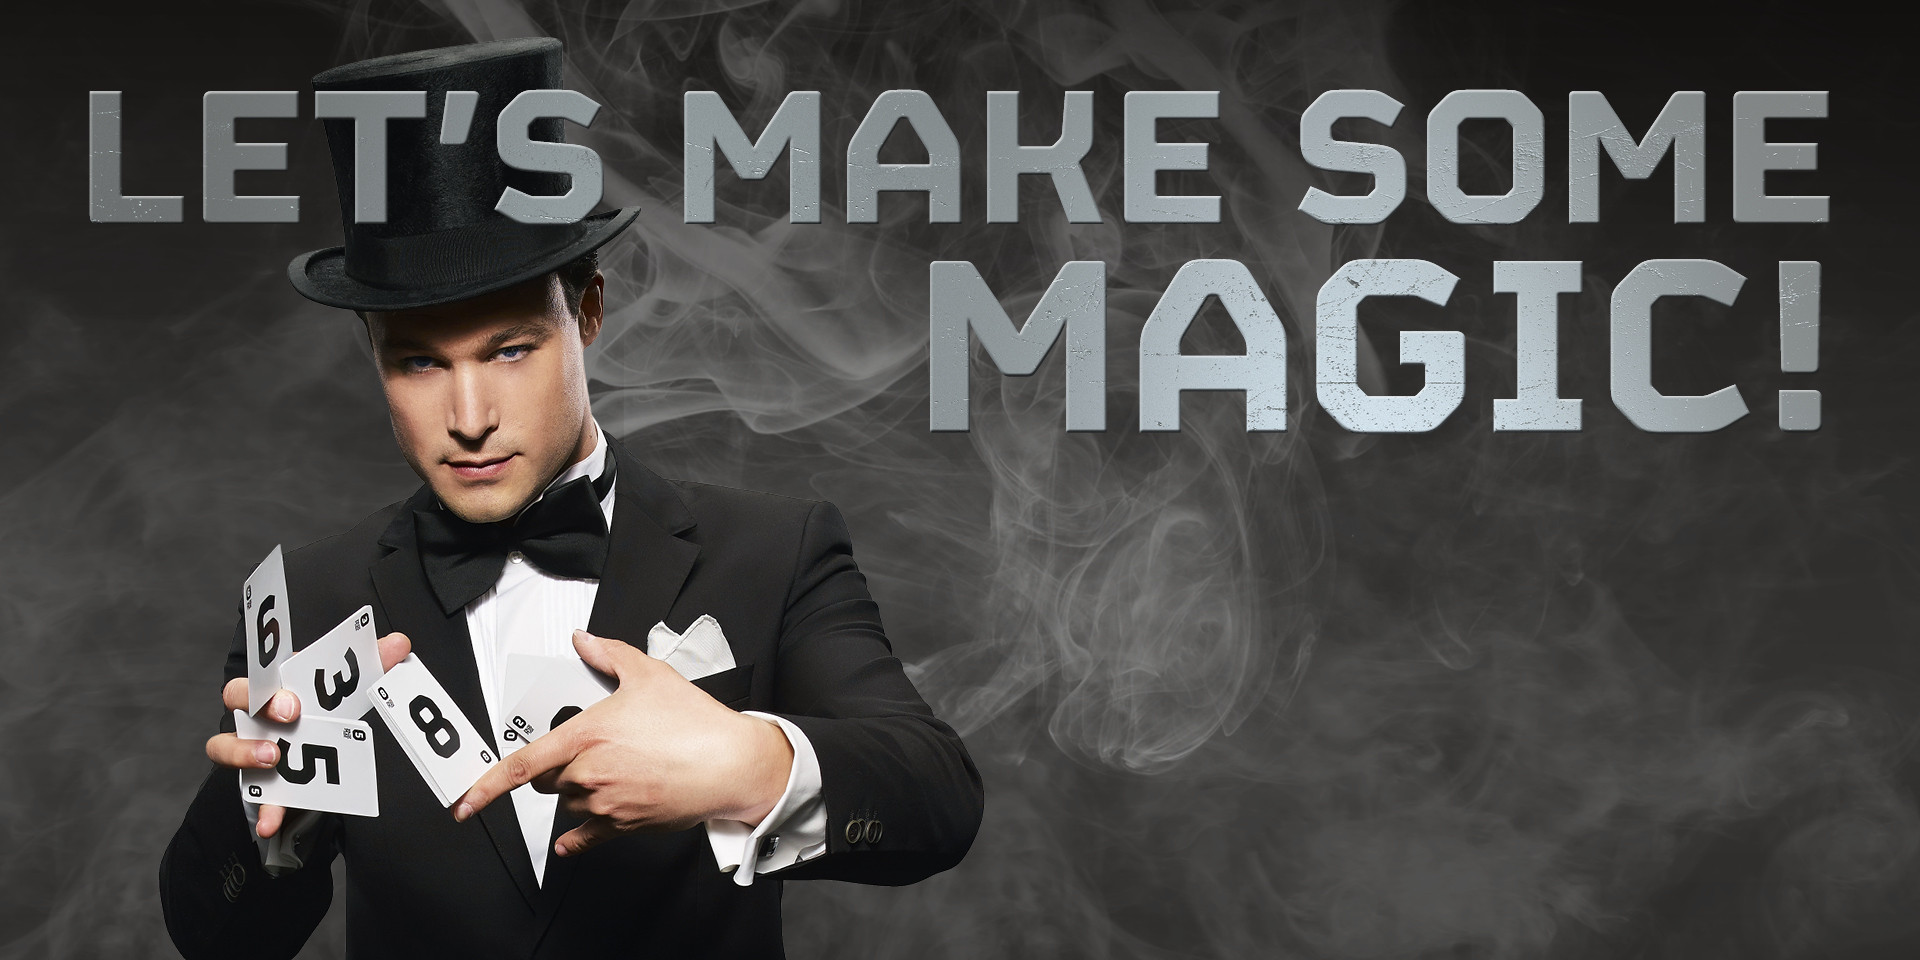 Are you ready for some magic?